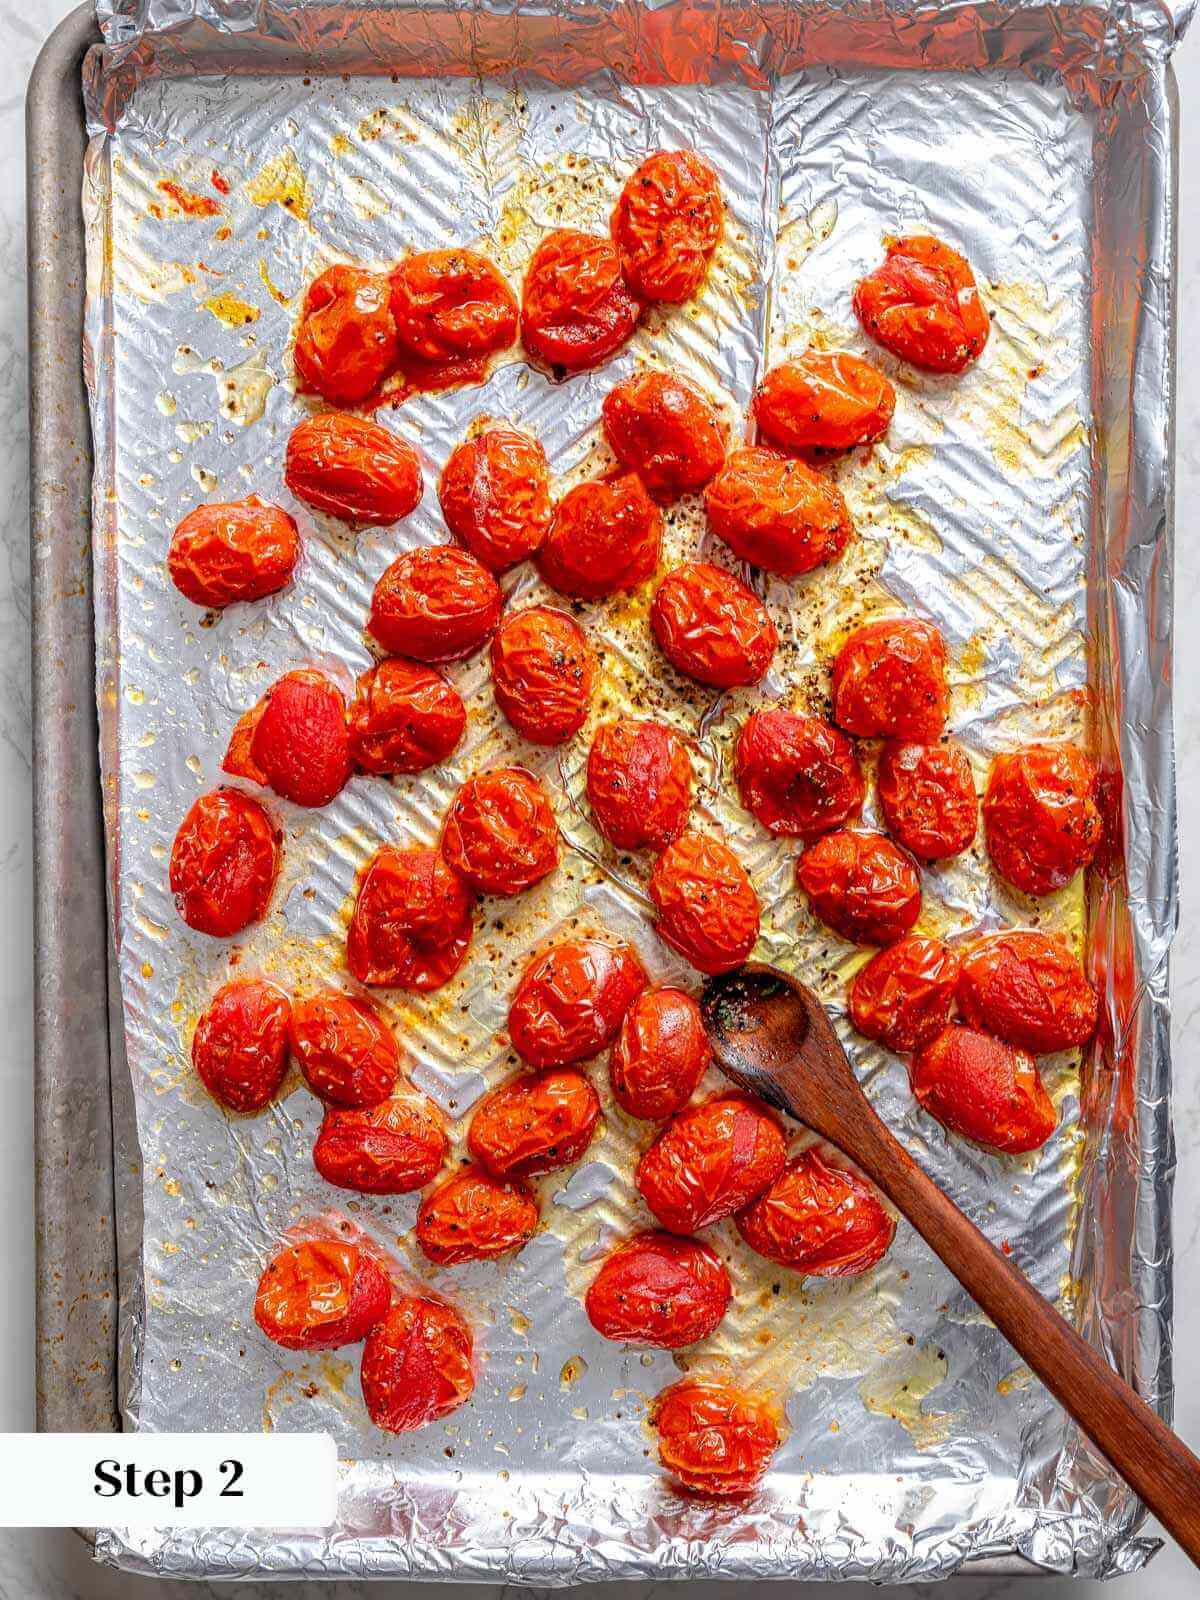 slow roasted tomatoes on foil lined baking sheet.